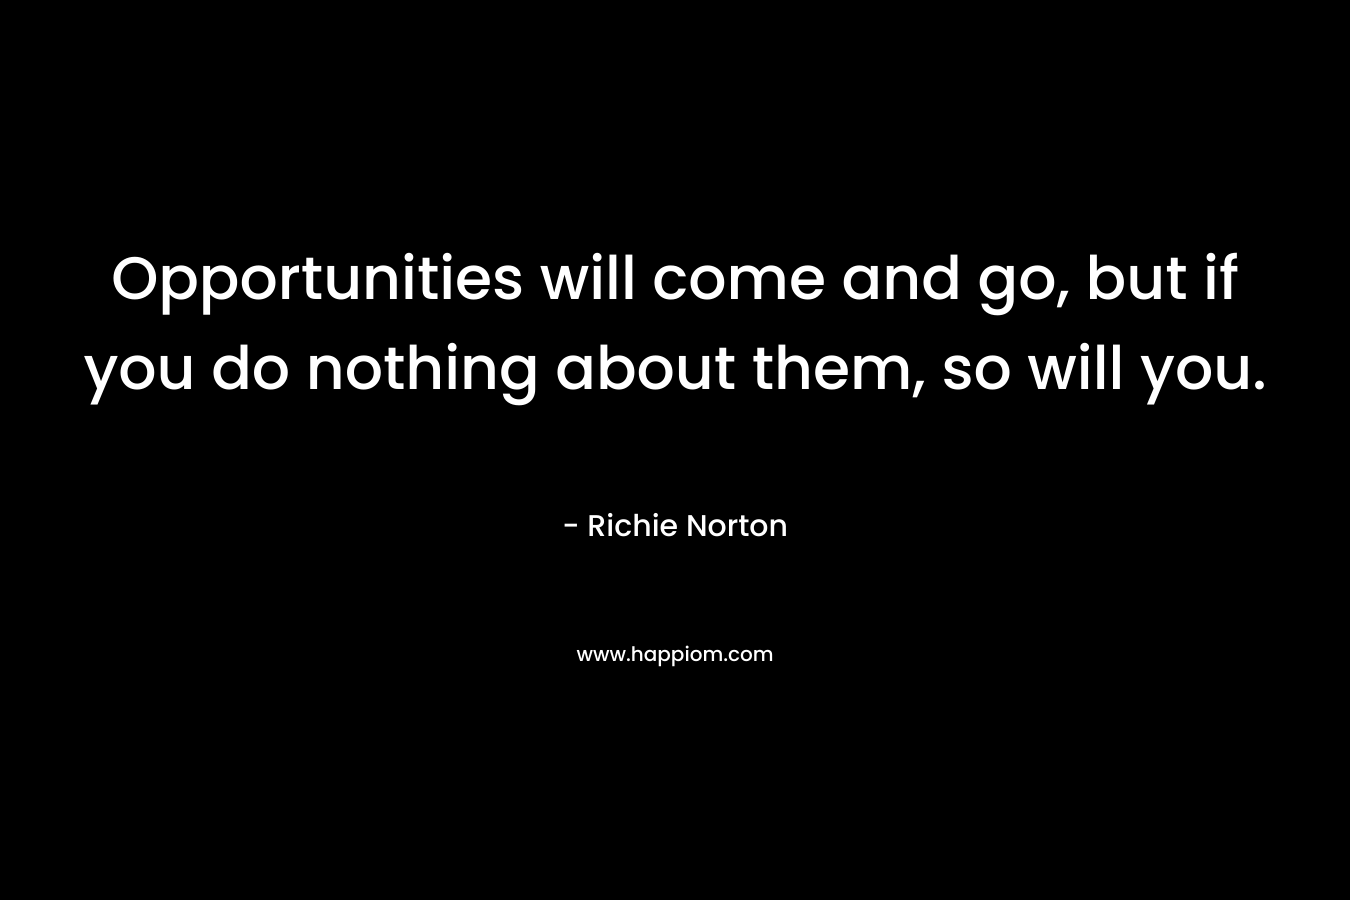 Opportunities will come and go, but if you do nothing about them, so will you.